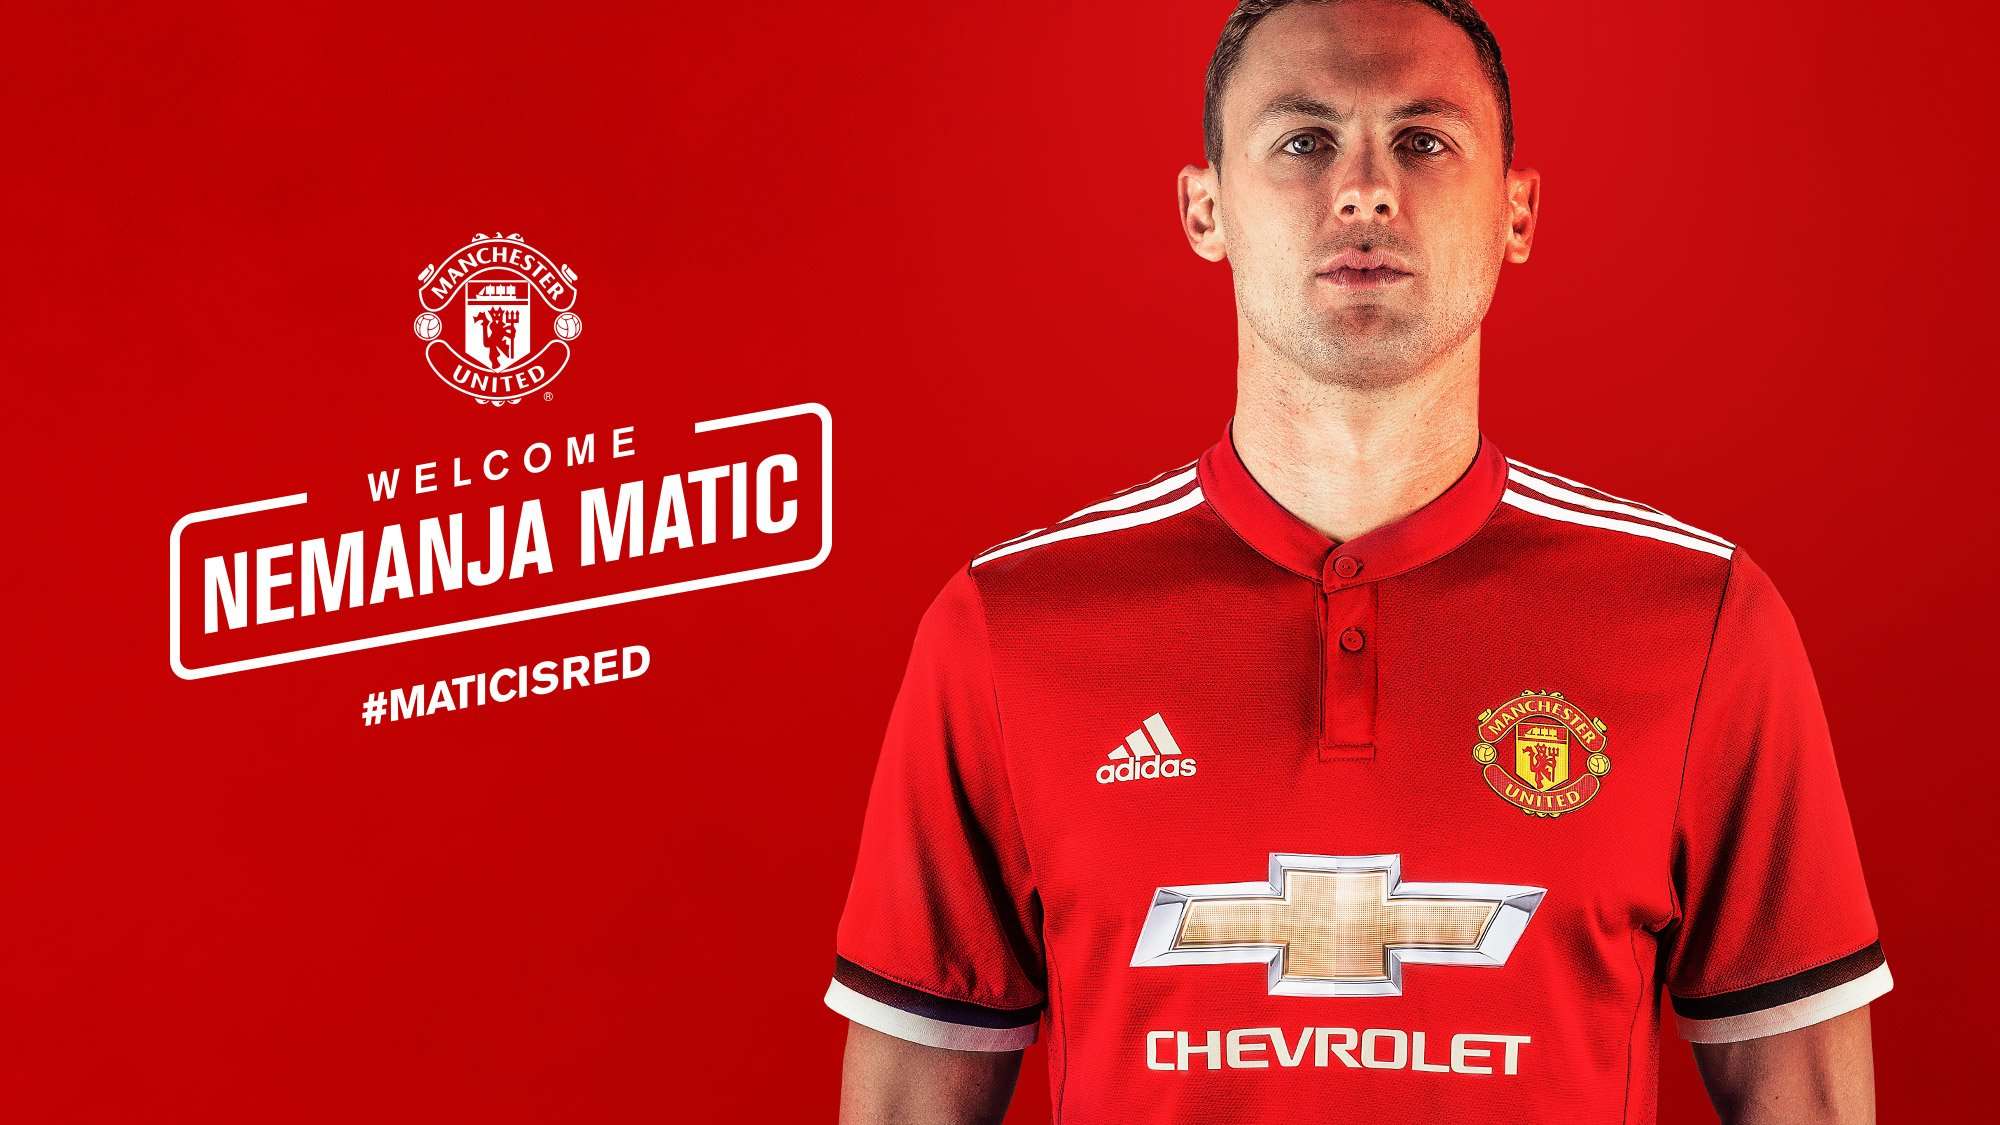 image for Official Manchester United Website